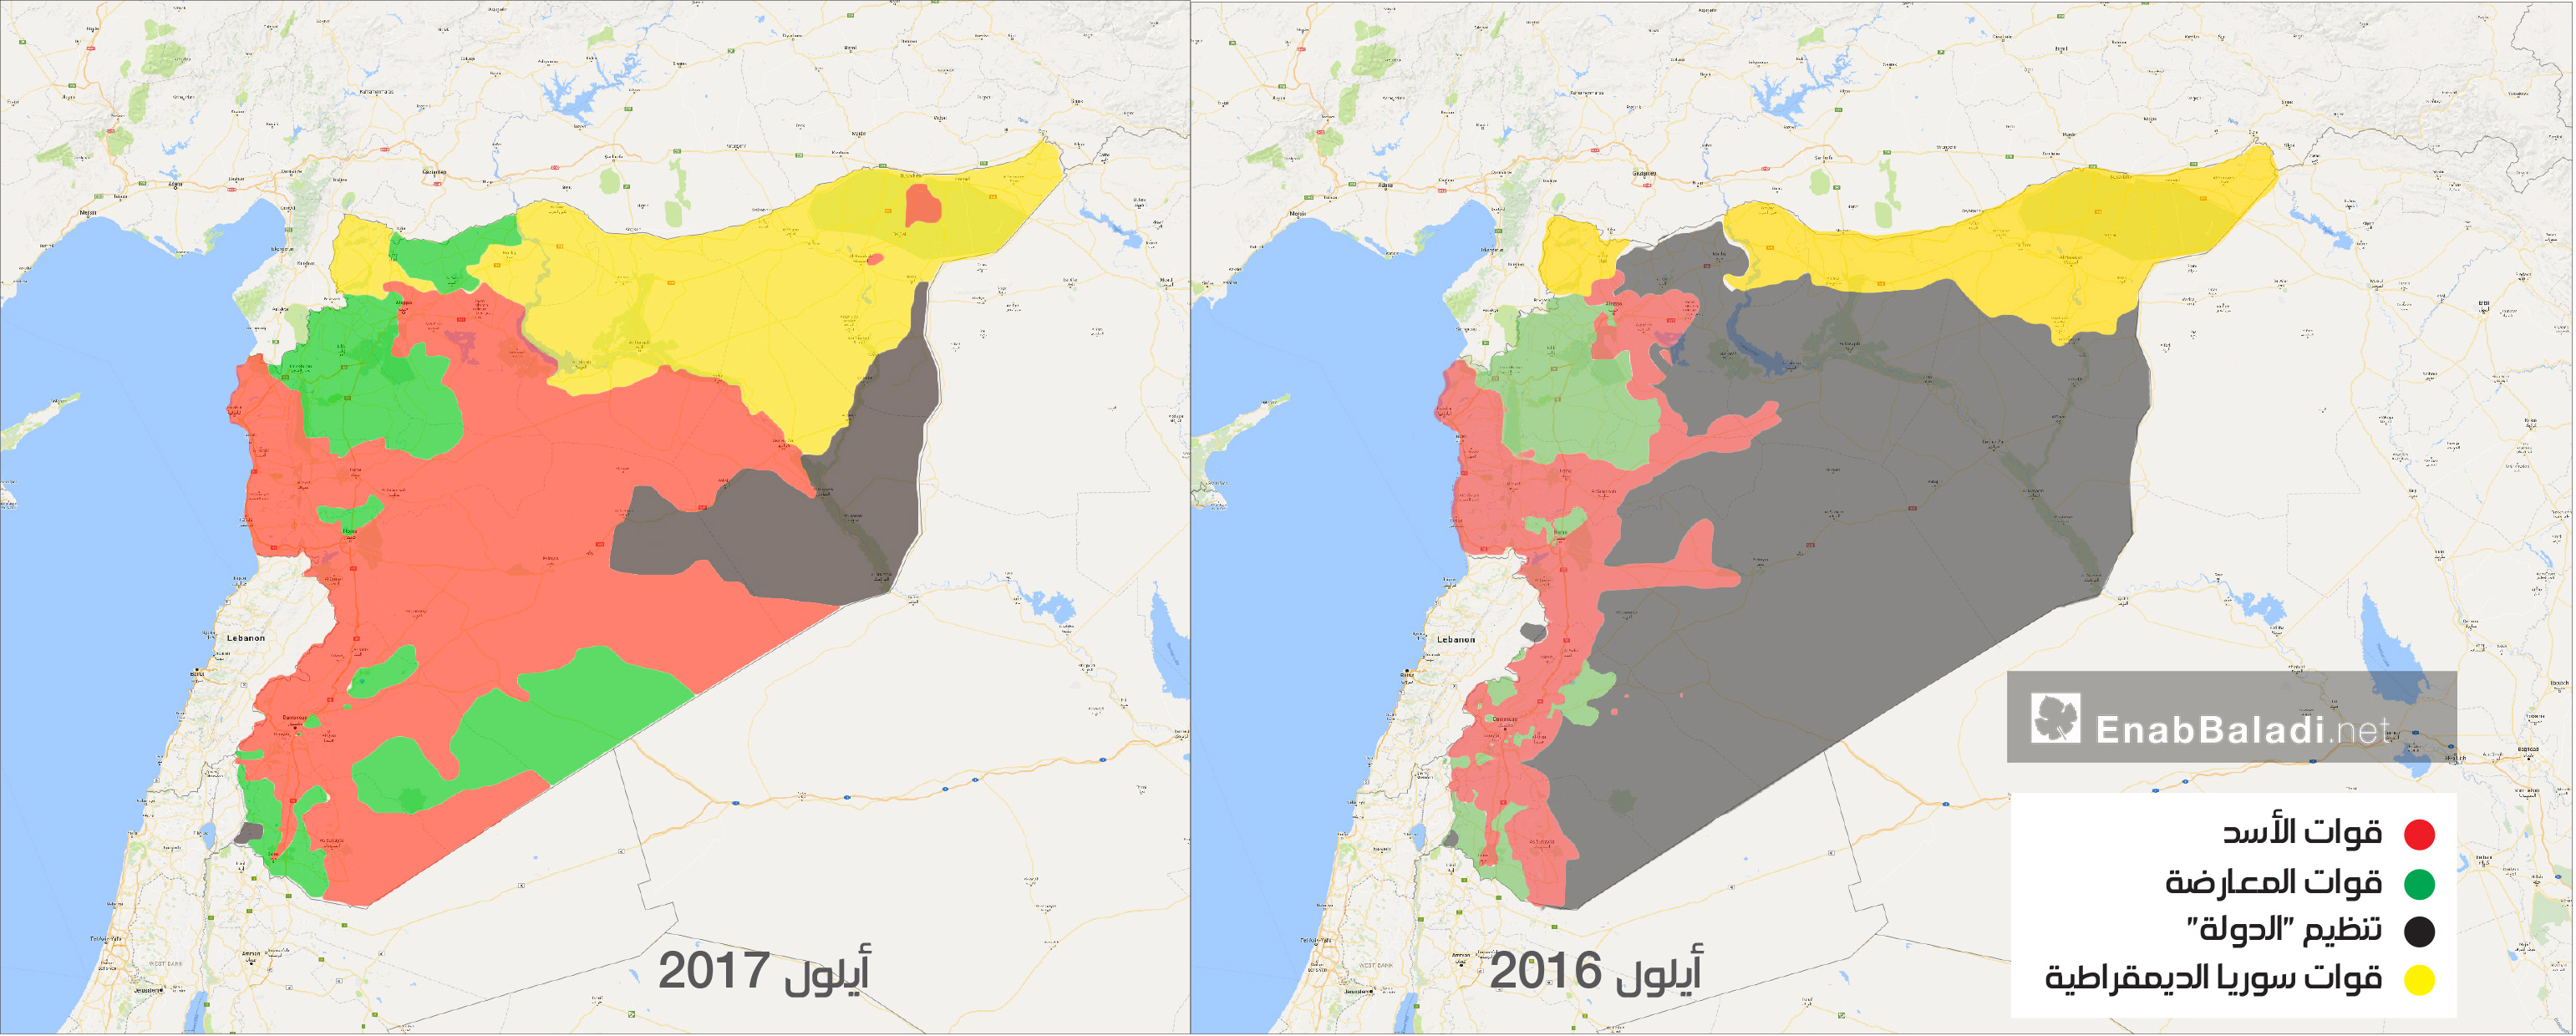 The change in the field control map in Syria between 2016 and 2017 (Enab Baladi)